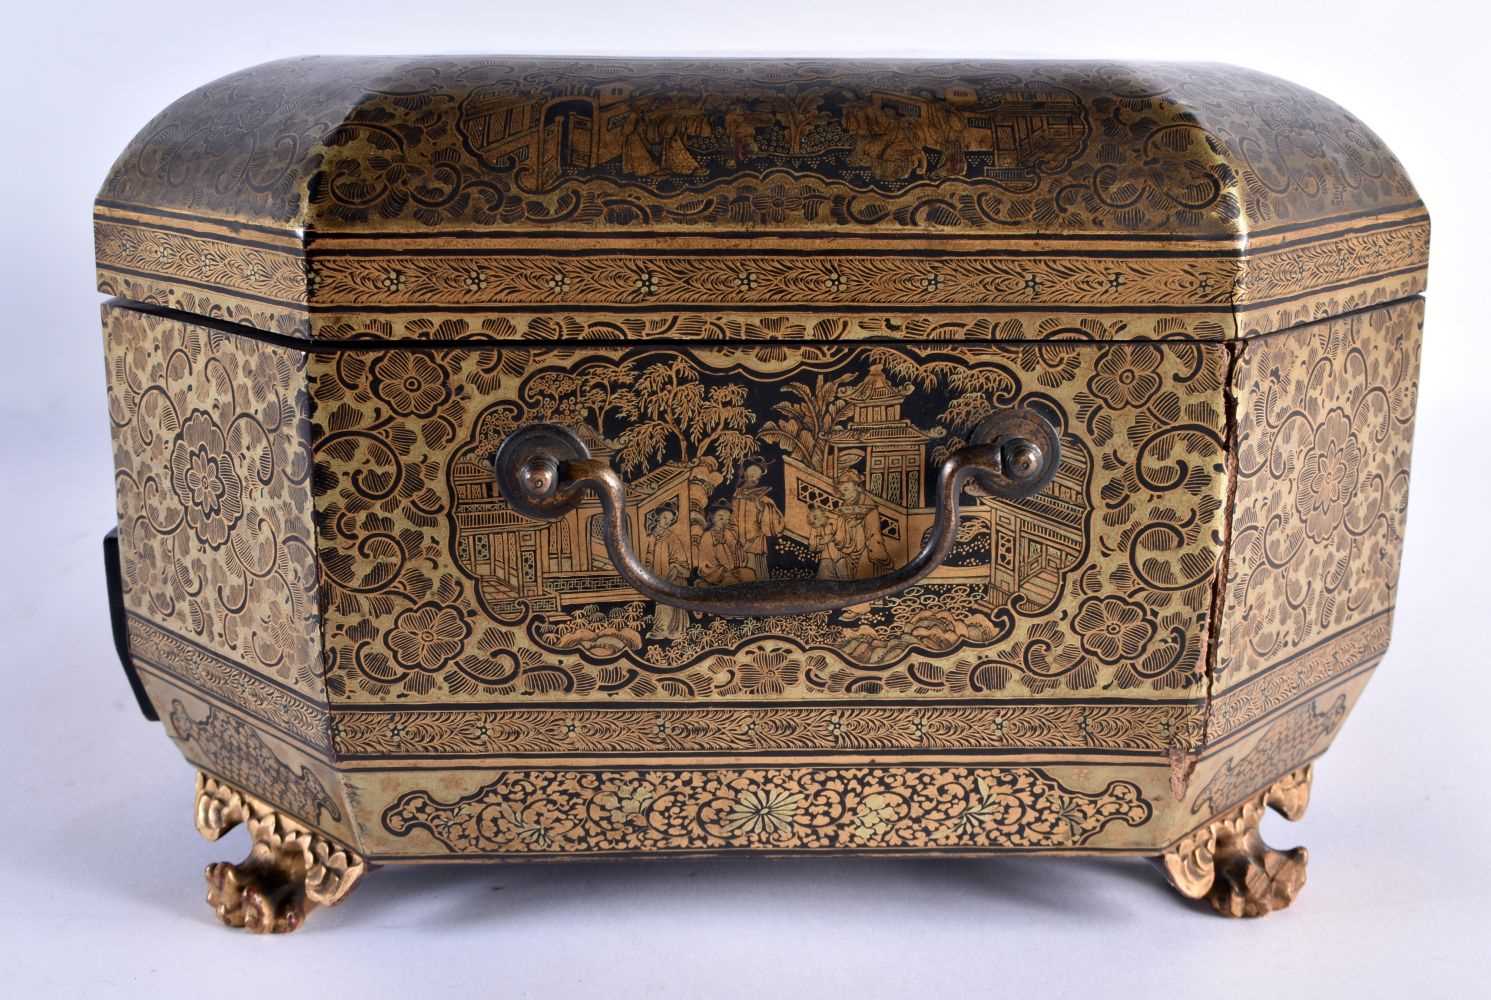 A FINE LATE 18TH/19TH CENTURY CHINESE EXPORT BLACK AND GOLD LACQUER SEWING CASKET Mid Qing, - Image 8 of 13